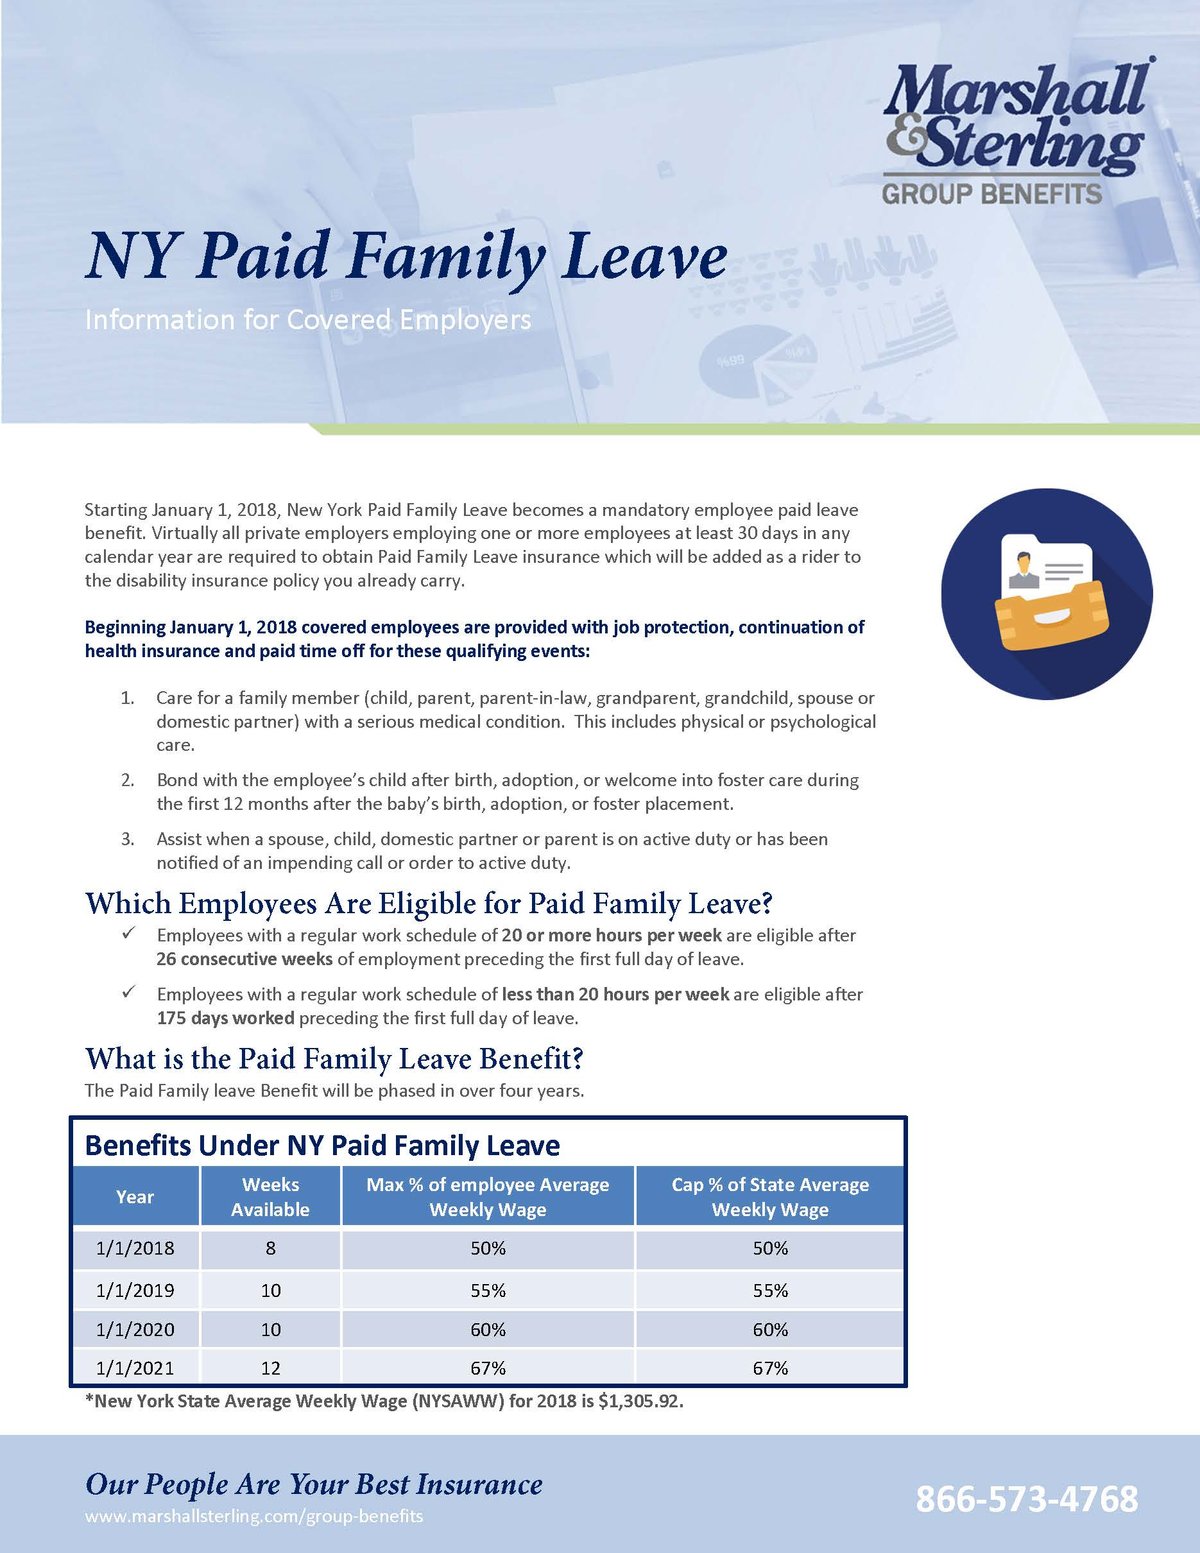 NY! Are you ready for Paid Family Leave? View our guide.